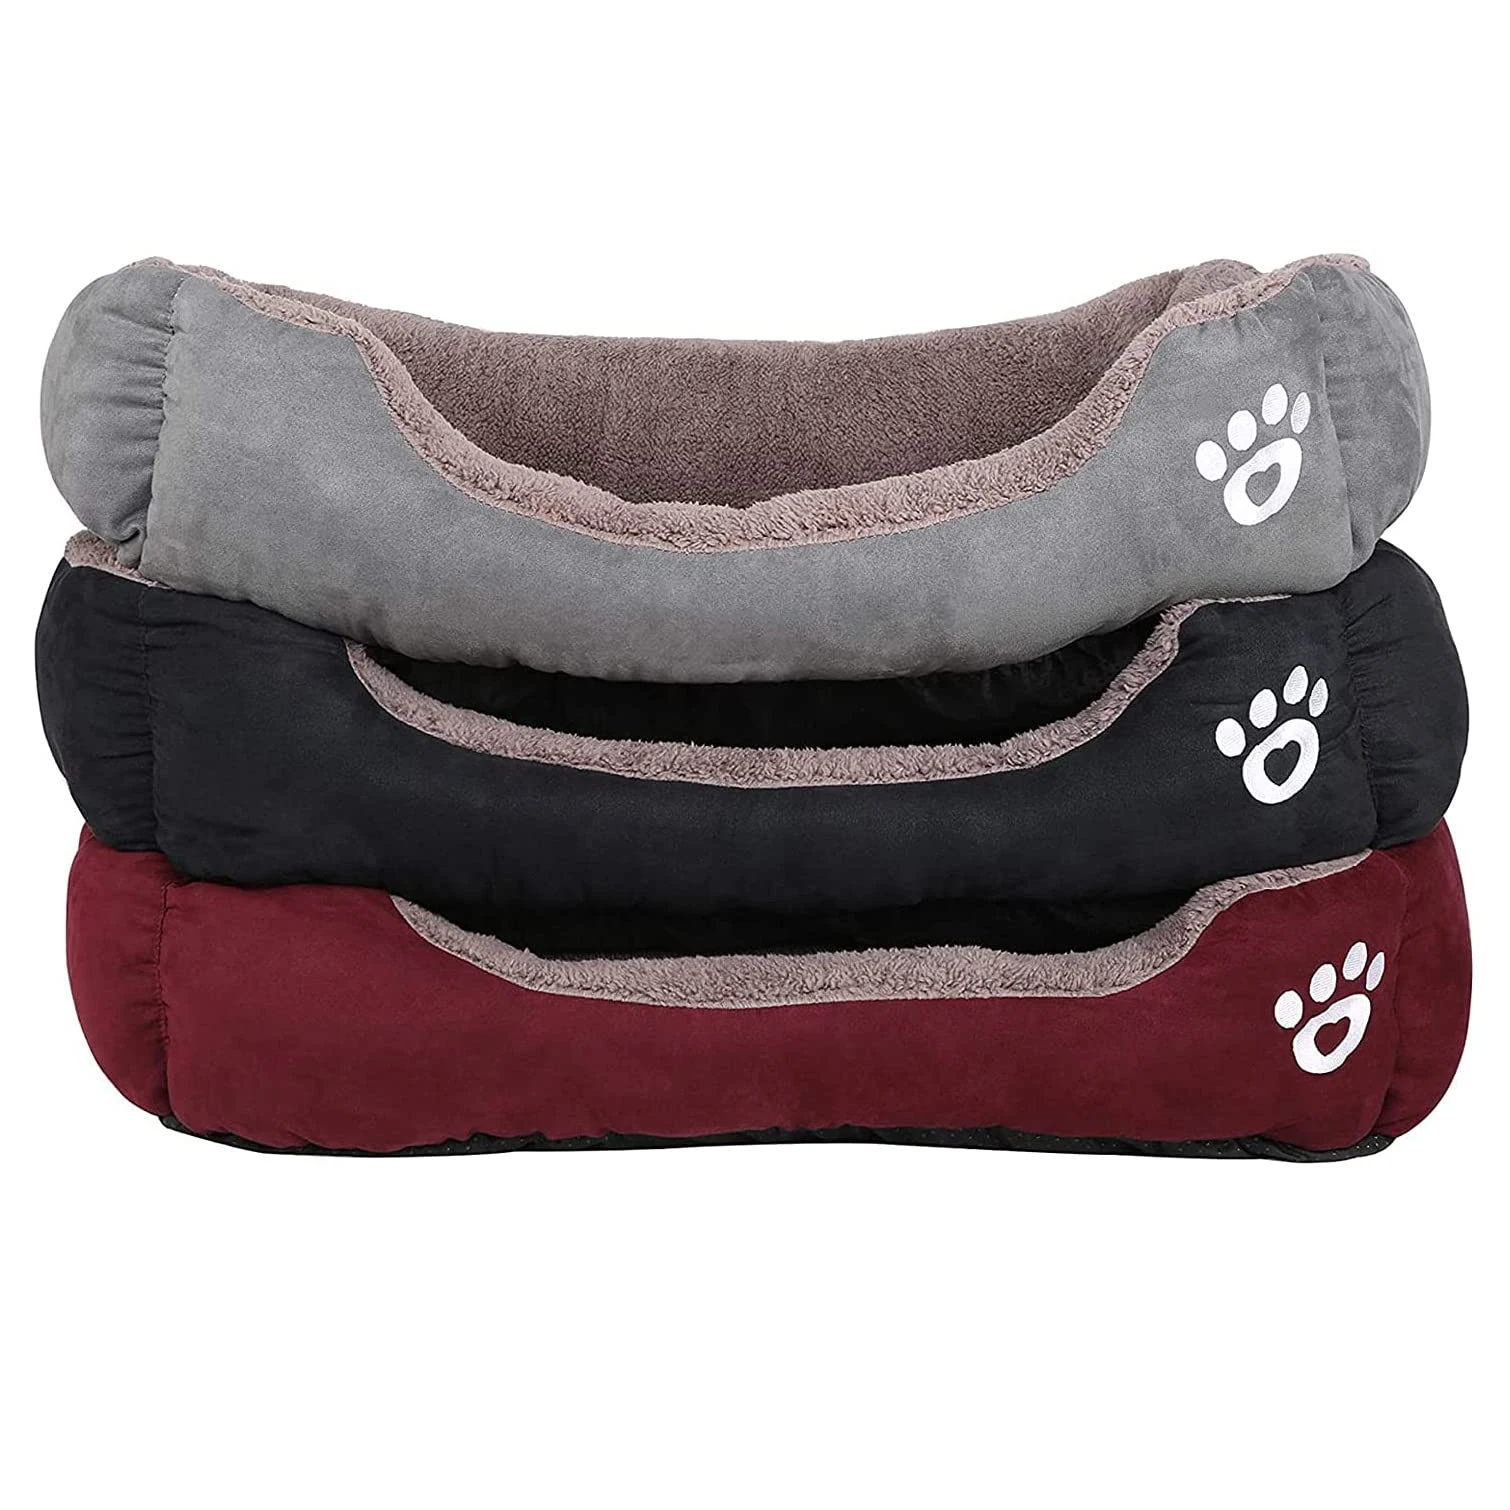 

DIVTOP Rectangle Breathable Orthopedic Memory Foam Dog Beds,Soft Cotton Nonskid Bottom Extra Large Mat Accessories Pet Beds.